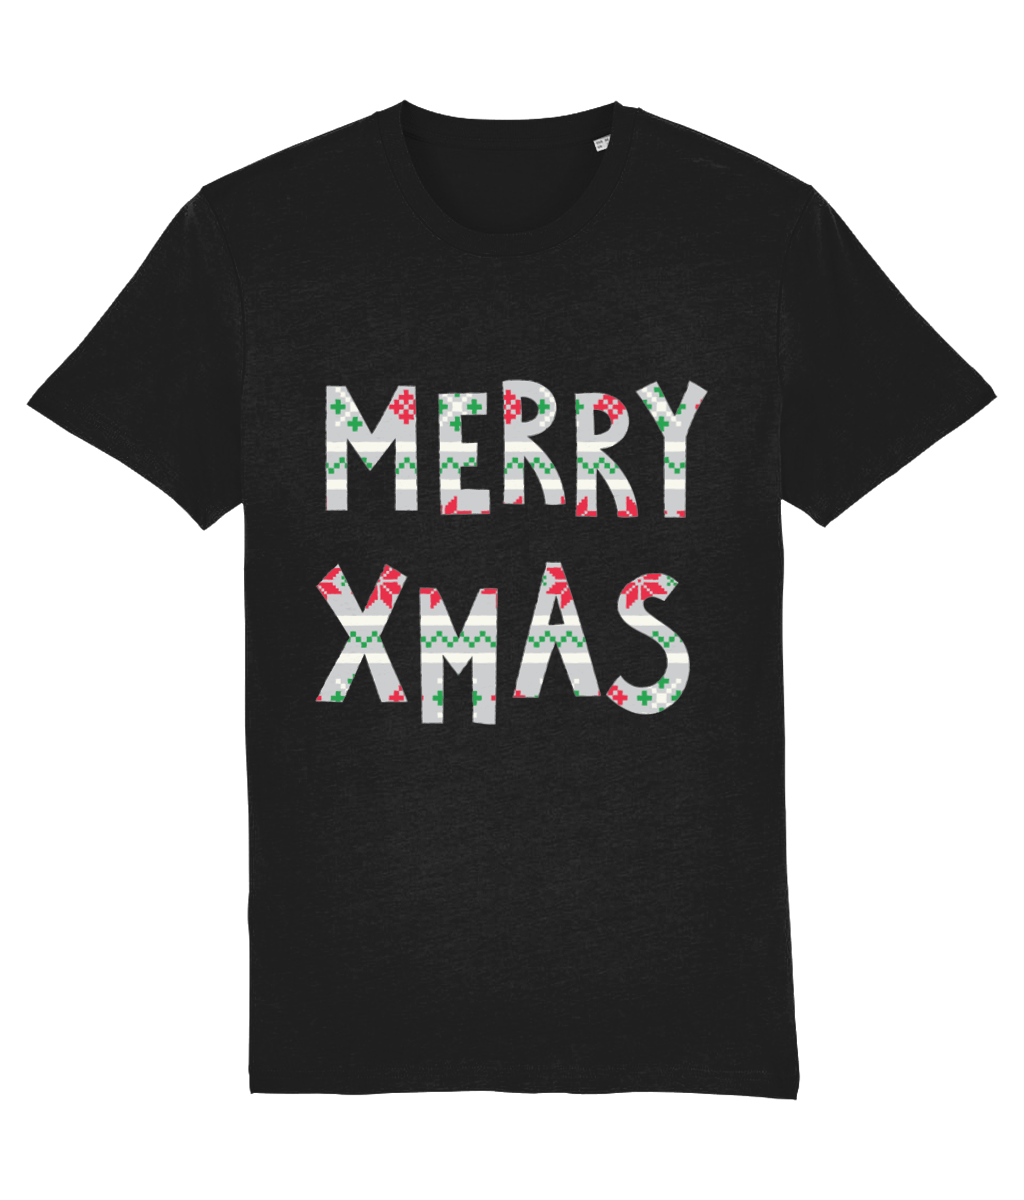 Merry Xmas Red and White T-shirt Men